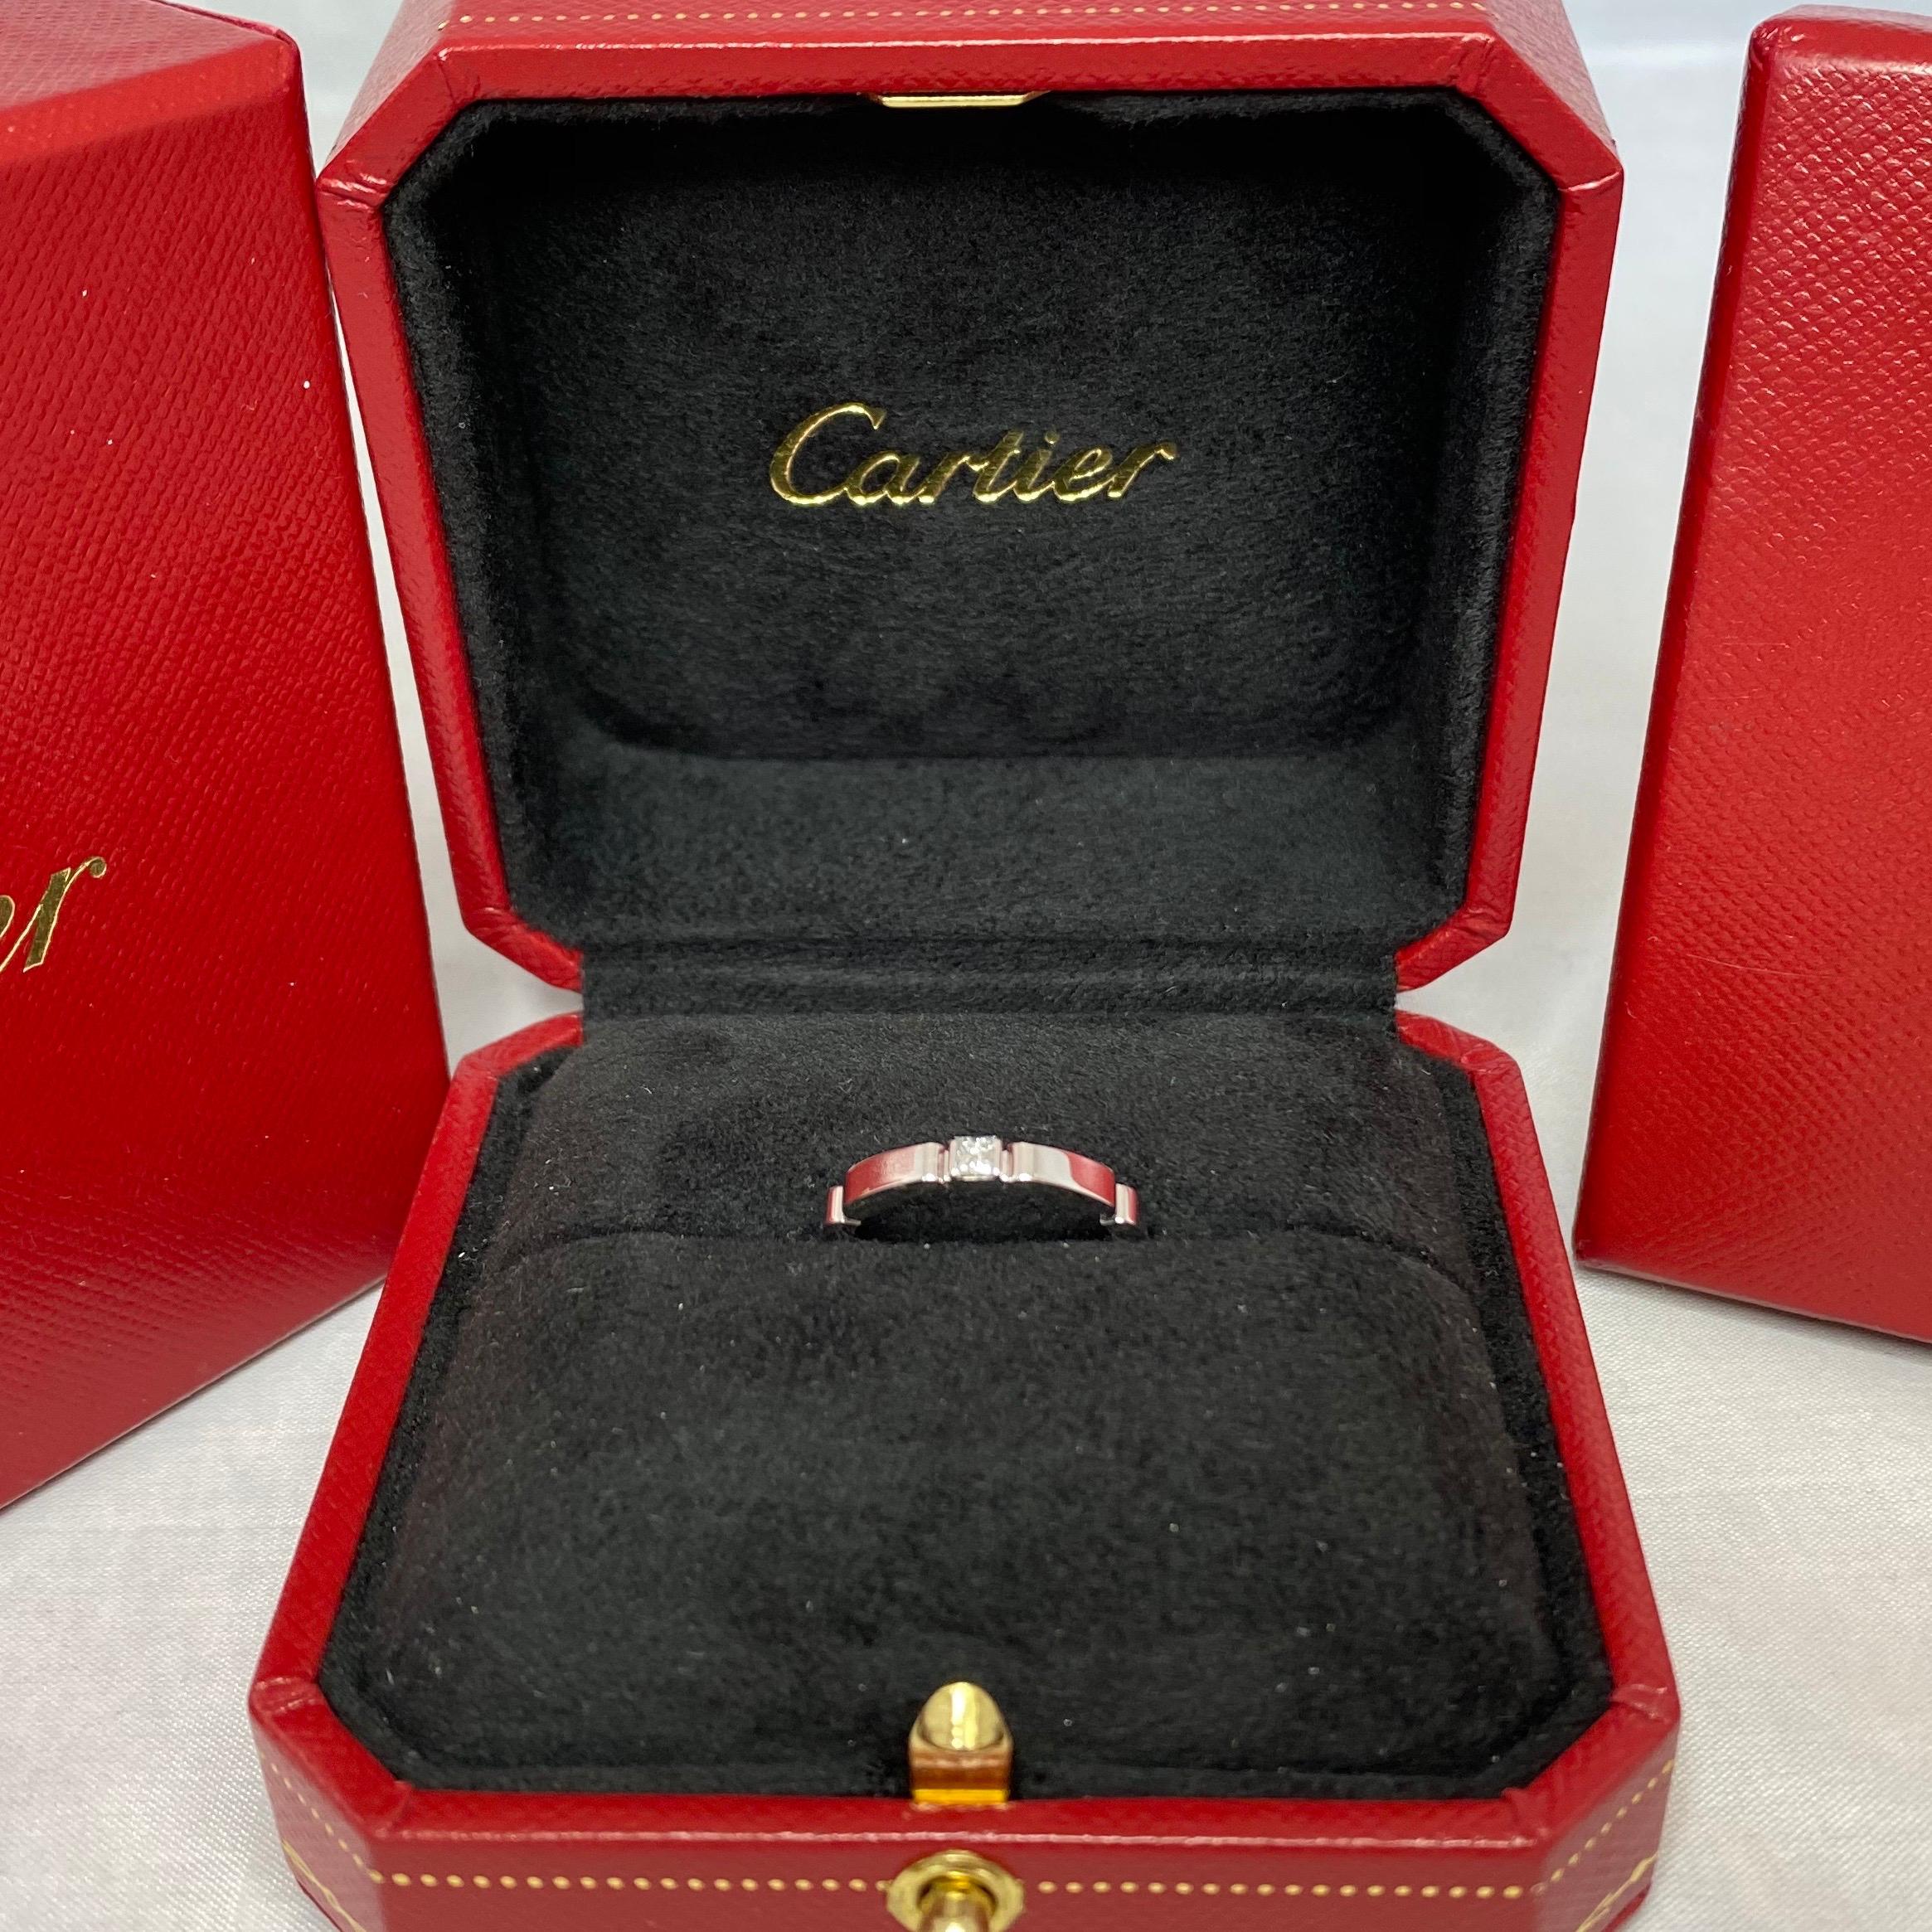 Cartier Maillon Panthere18k White Gold Princess Cut Diamond Band Ring In Cartier Box.

Beautiful white gold band ring with a 2.5mm princess cut diamond The diamond measures 2.5mm (approx 0.10ct). Fine jewellery houses like Cartier only use the